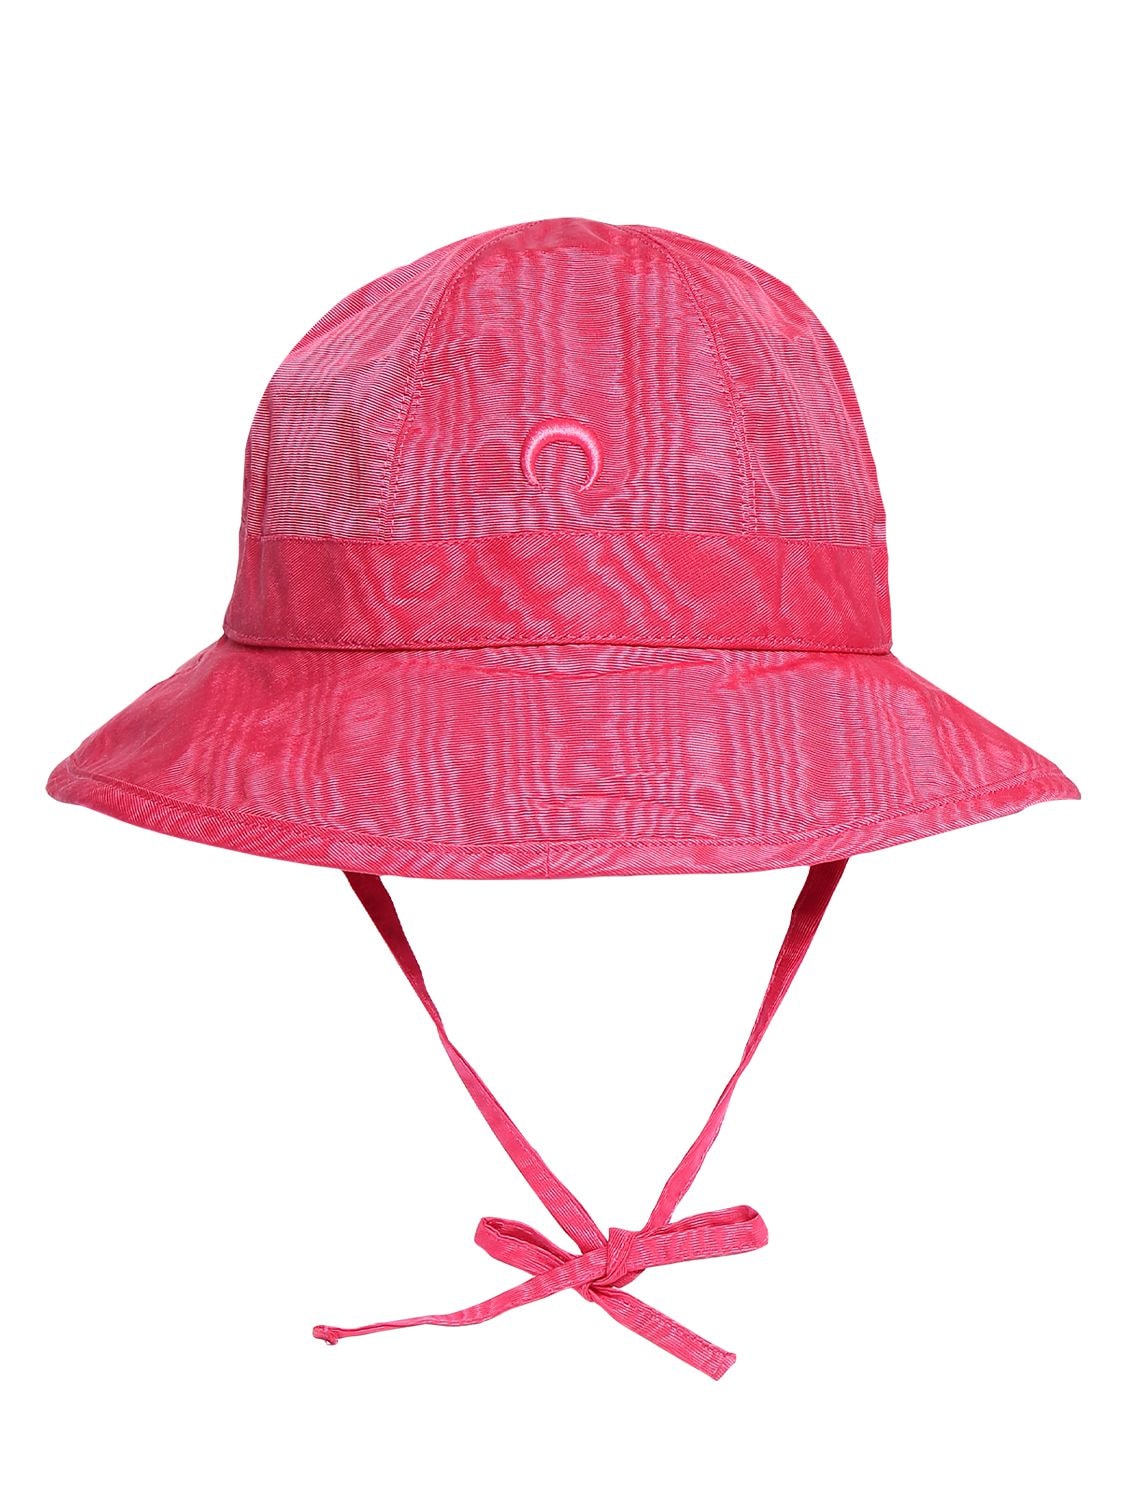 Embroidered Moon Bell Bucket Hat